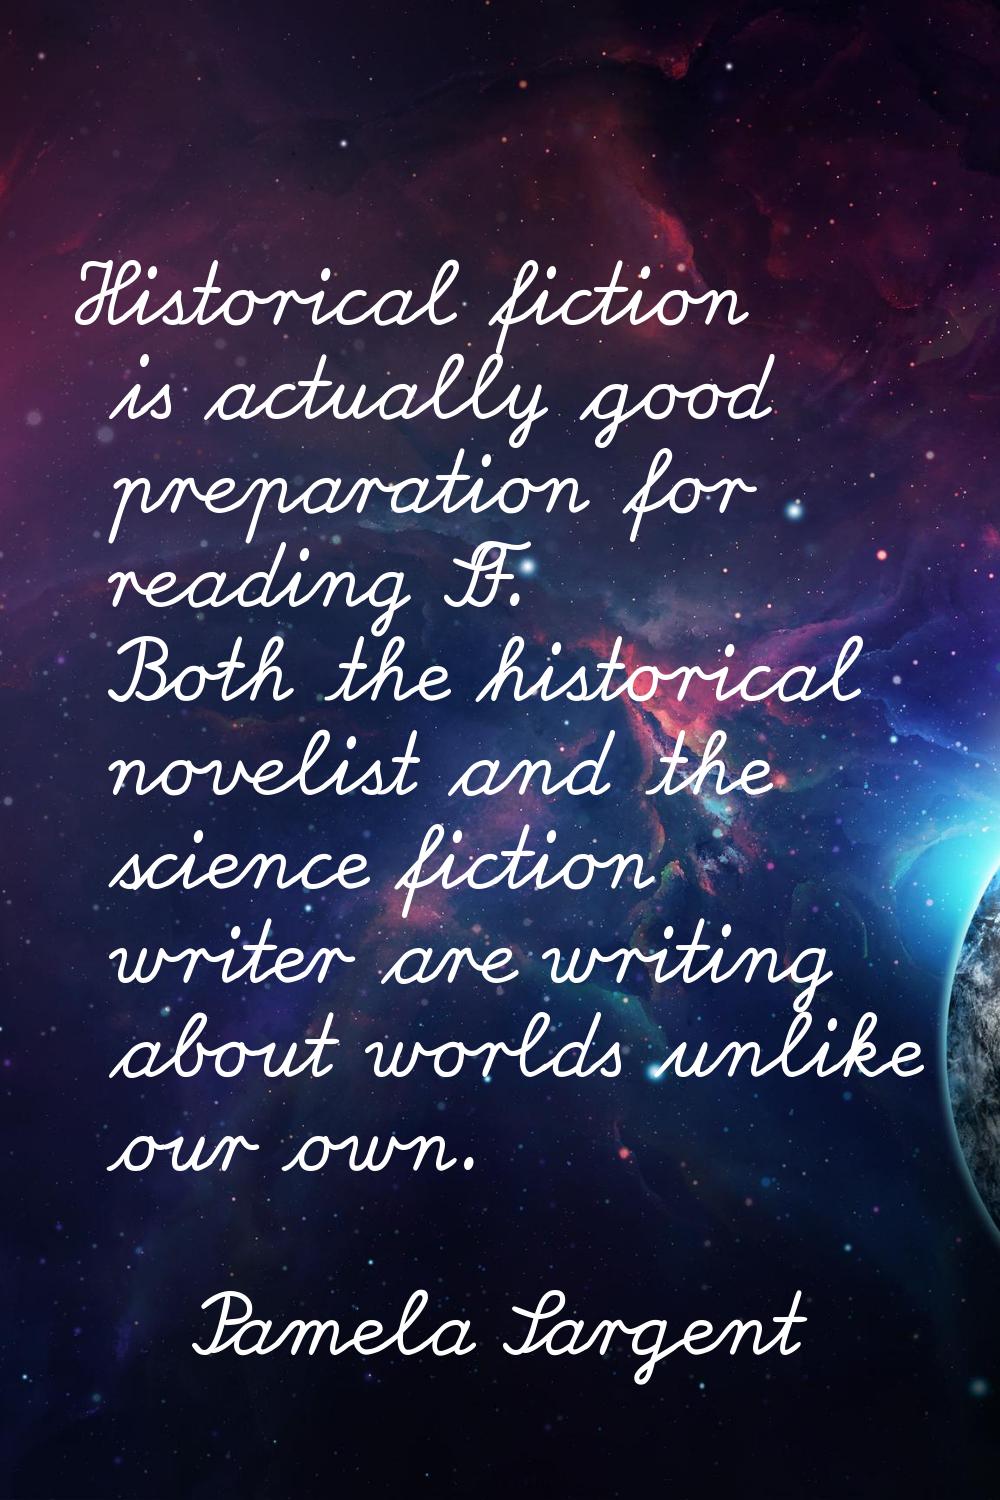 Historical fiction is actually good preparation for reading SF. Both the historical novelist and th